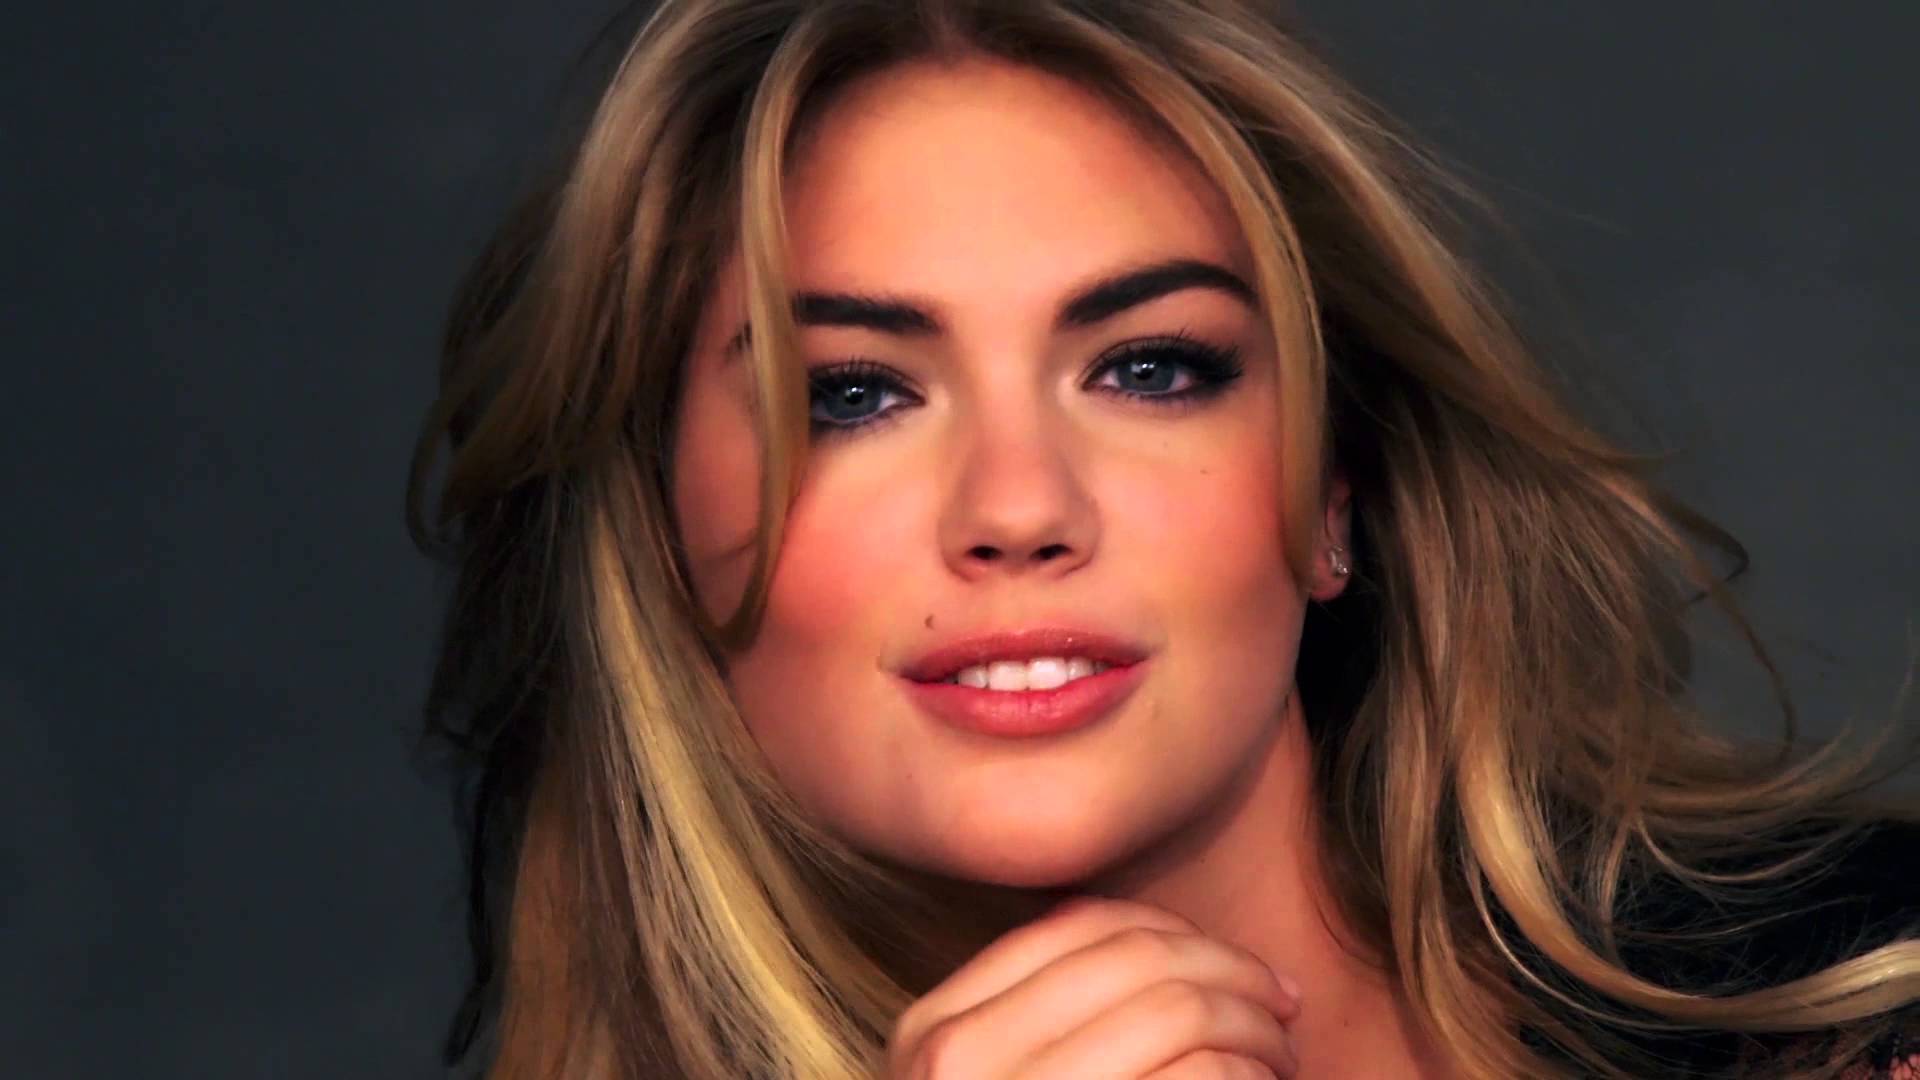 Kate Upton Behind The Scenes Legends. Sports Illustrated Swimsuit